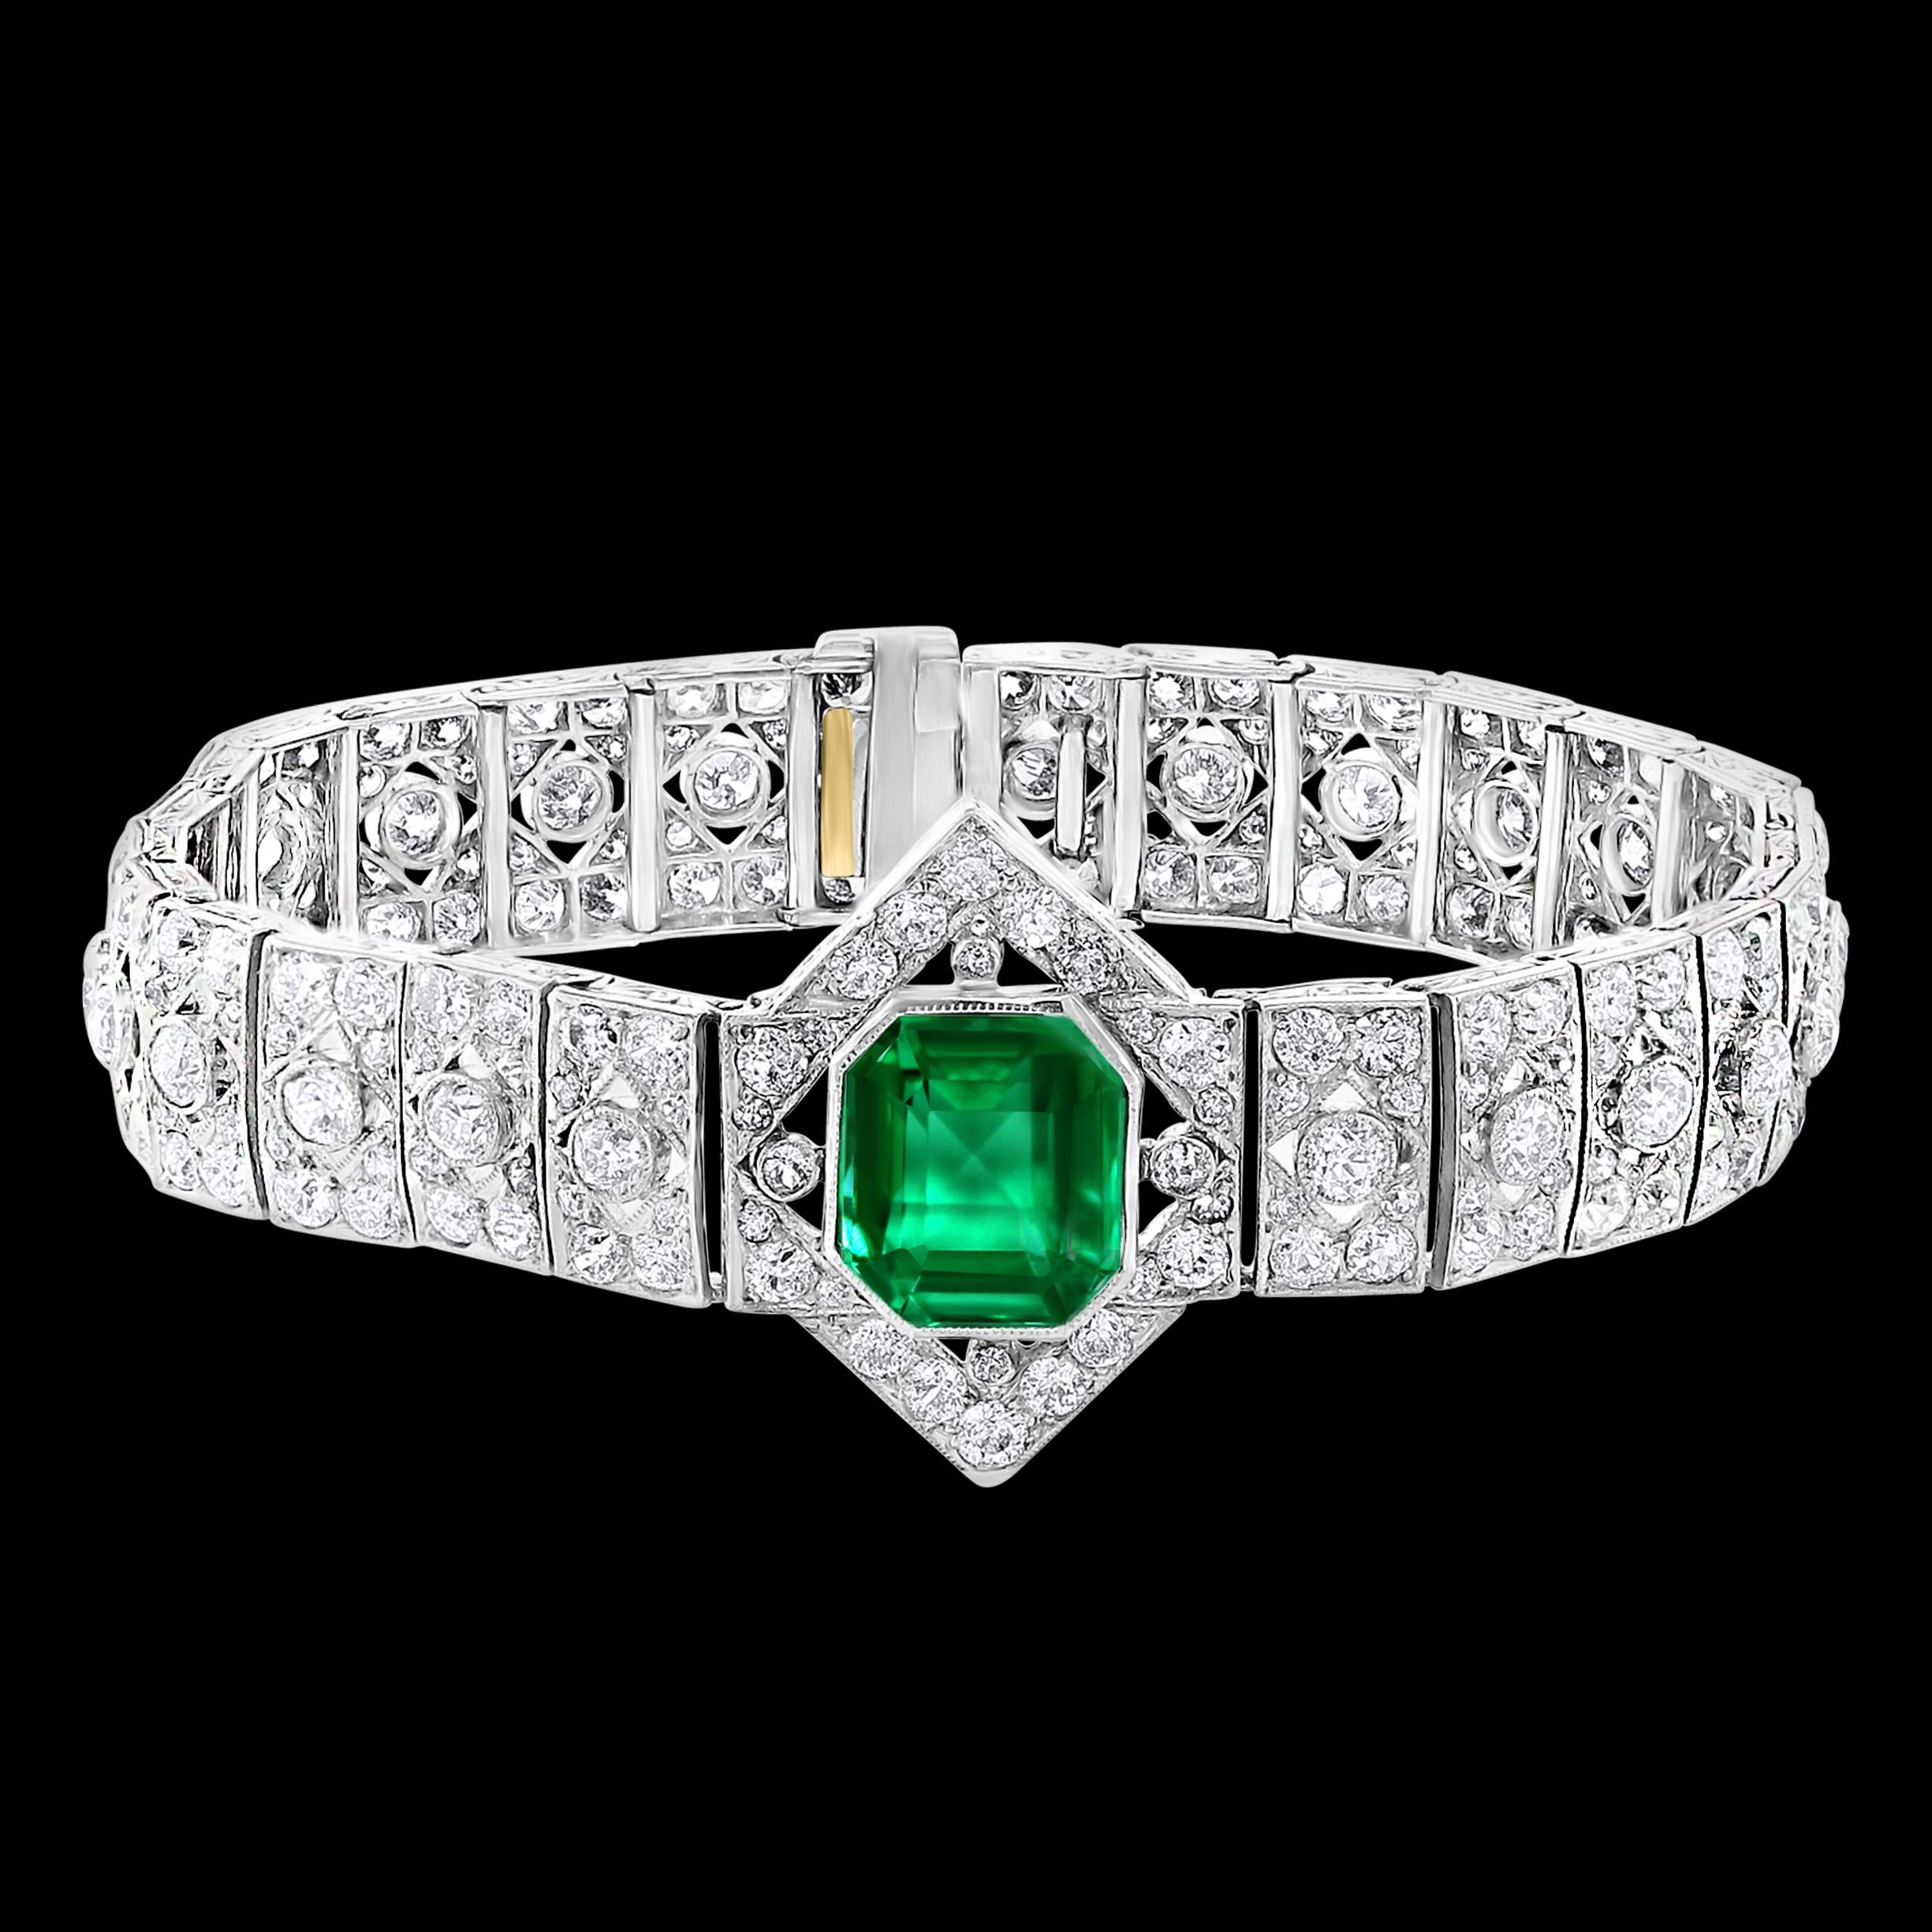  1930's AGL Certified 3.4 Ct Colombian Emerald Insignificant to Minor  & 8 Ct Diamond Platinum Bracelet 
A spectacular jewelry piece.  This exceptional bracelet has a Colombian  Emerald as a center stone . Weight of the Colombian Emerald is 3.39 